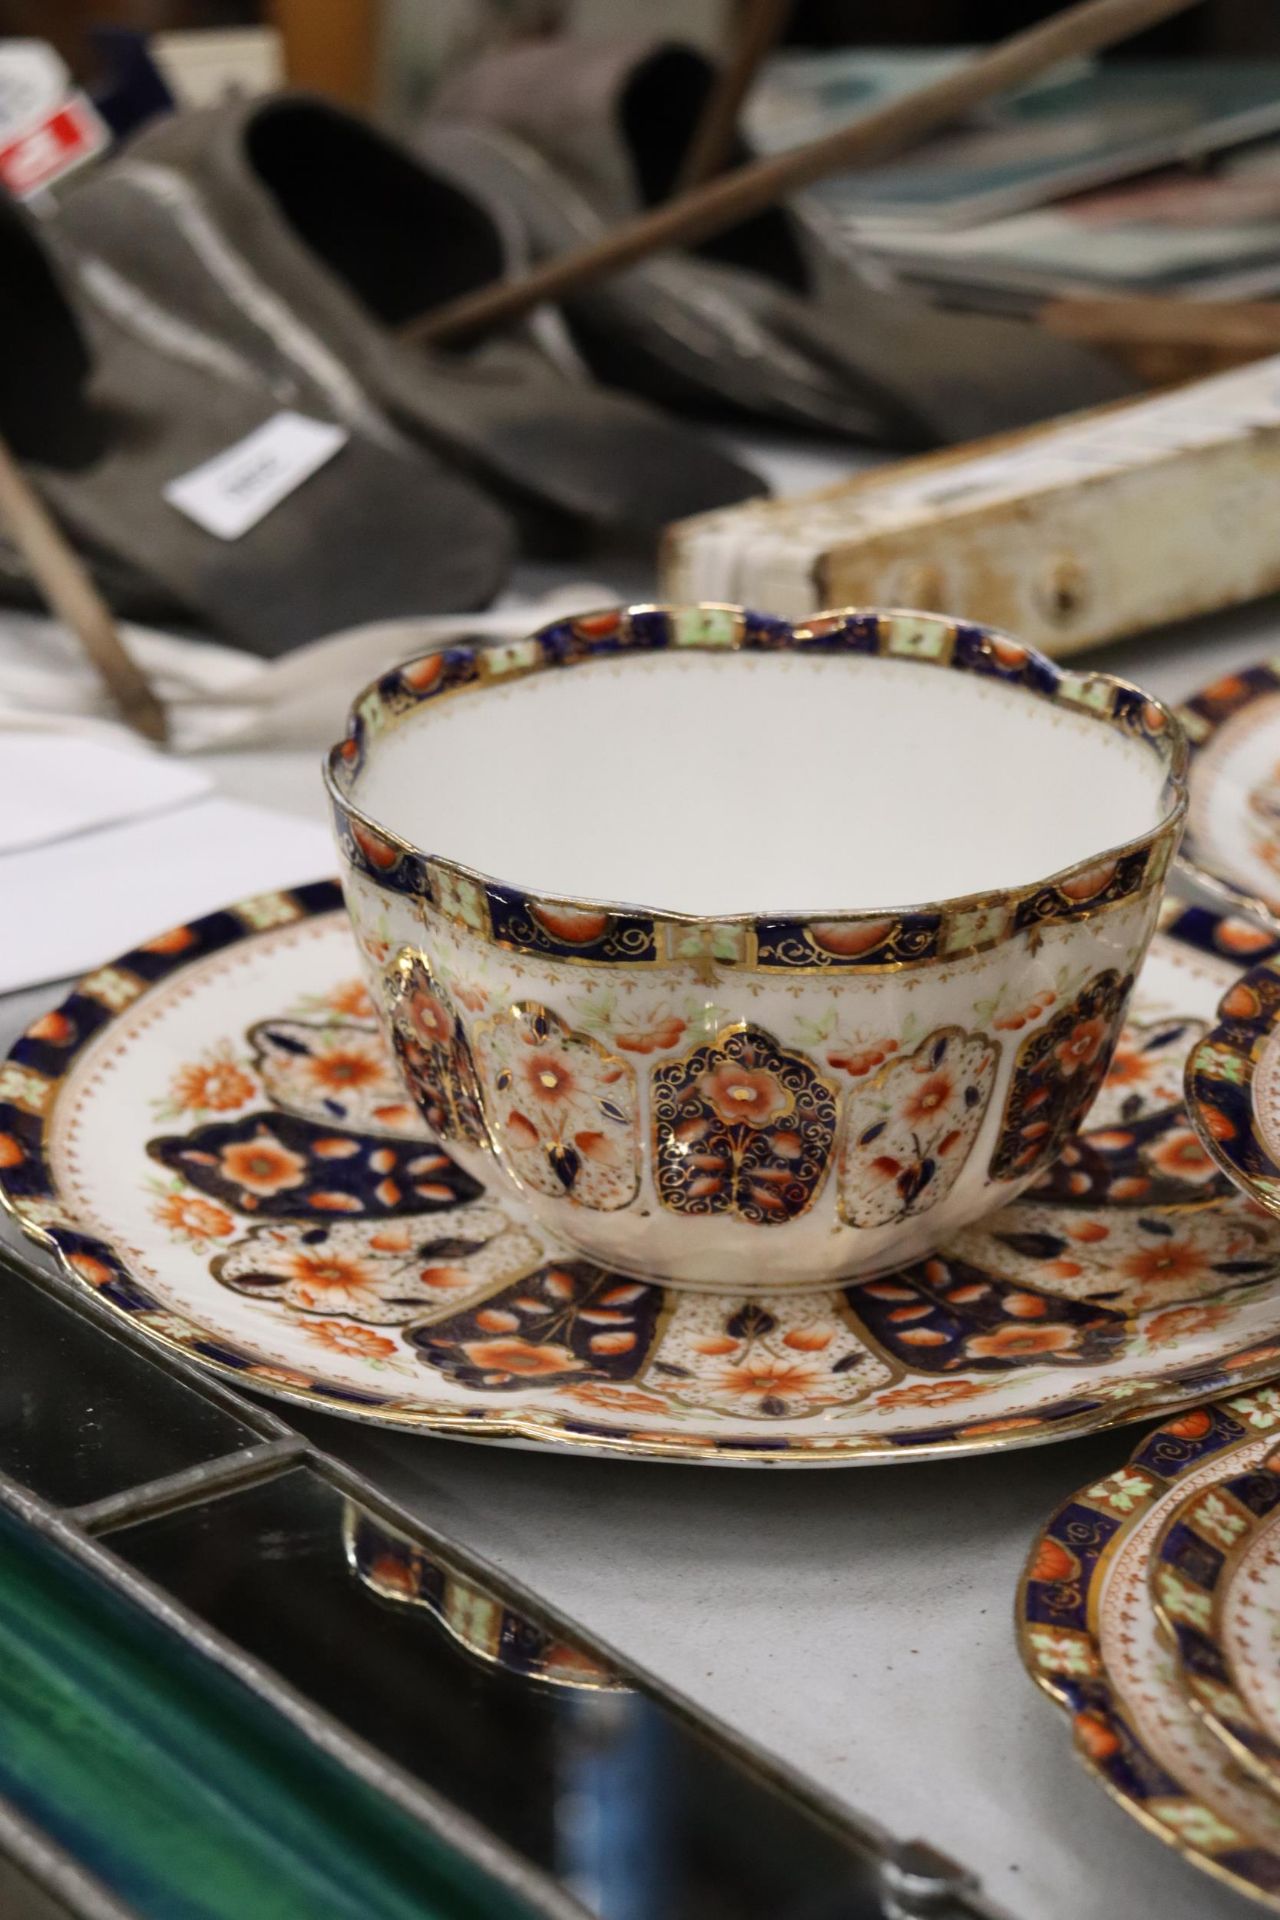 AN ANTIQUE 'COURT CHINA' TEASET TO INCLUDE CAKE PLATES, CUPS, SAUCERS, SIDE PLATES AND A SUGAR BOWL - Bild 5 aus 9